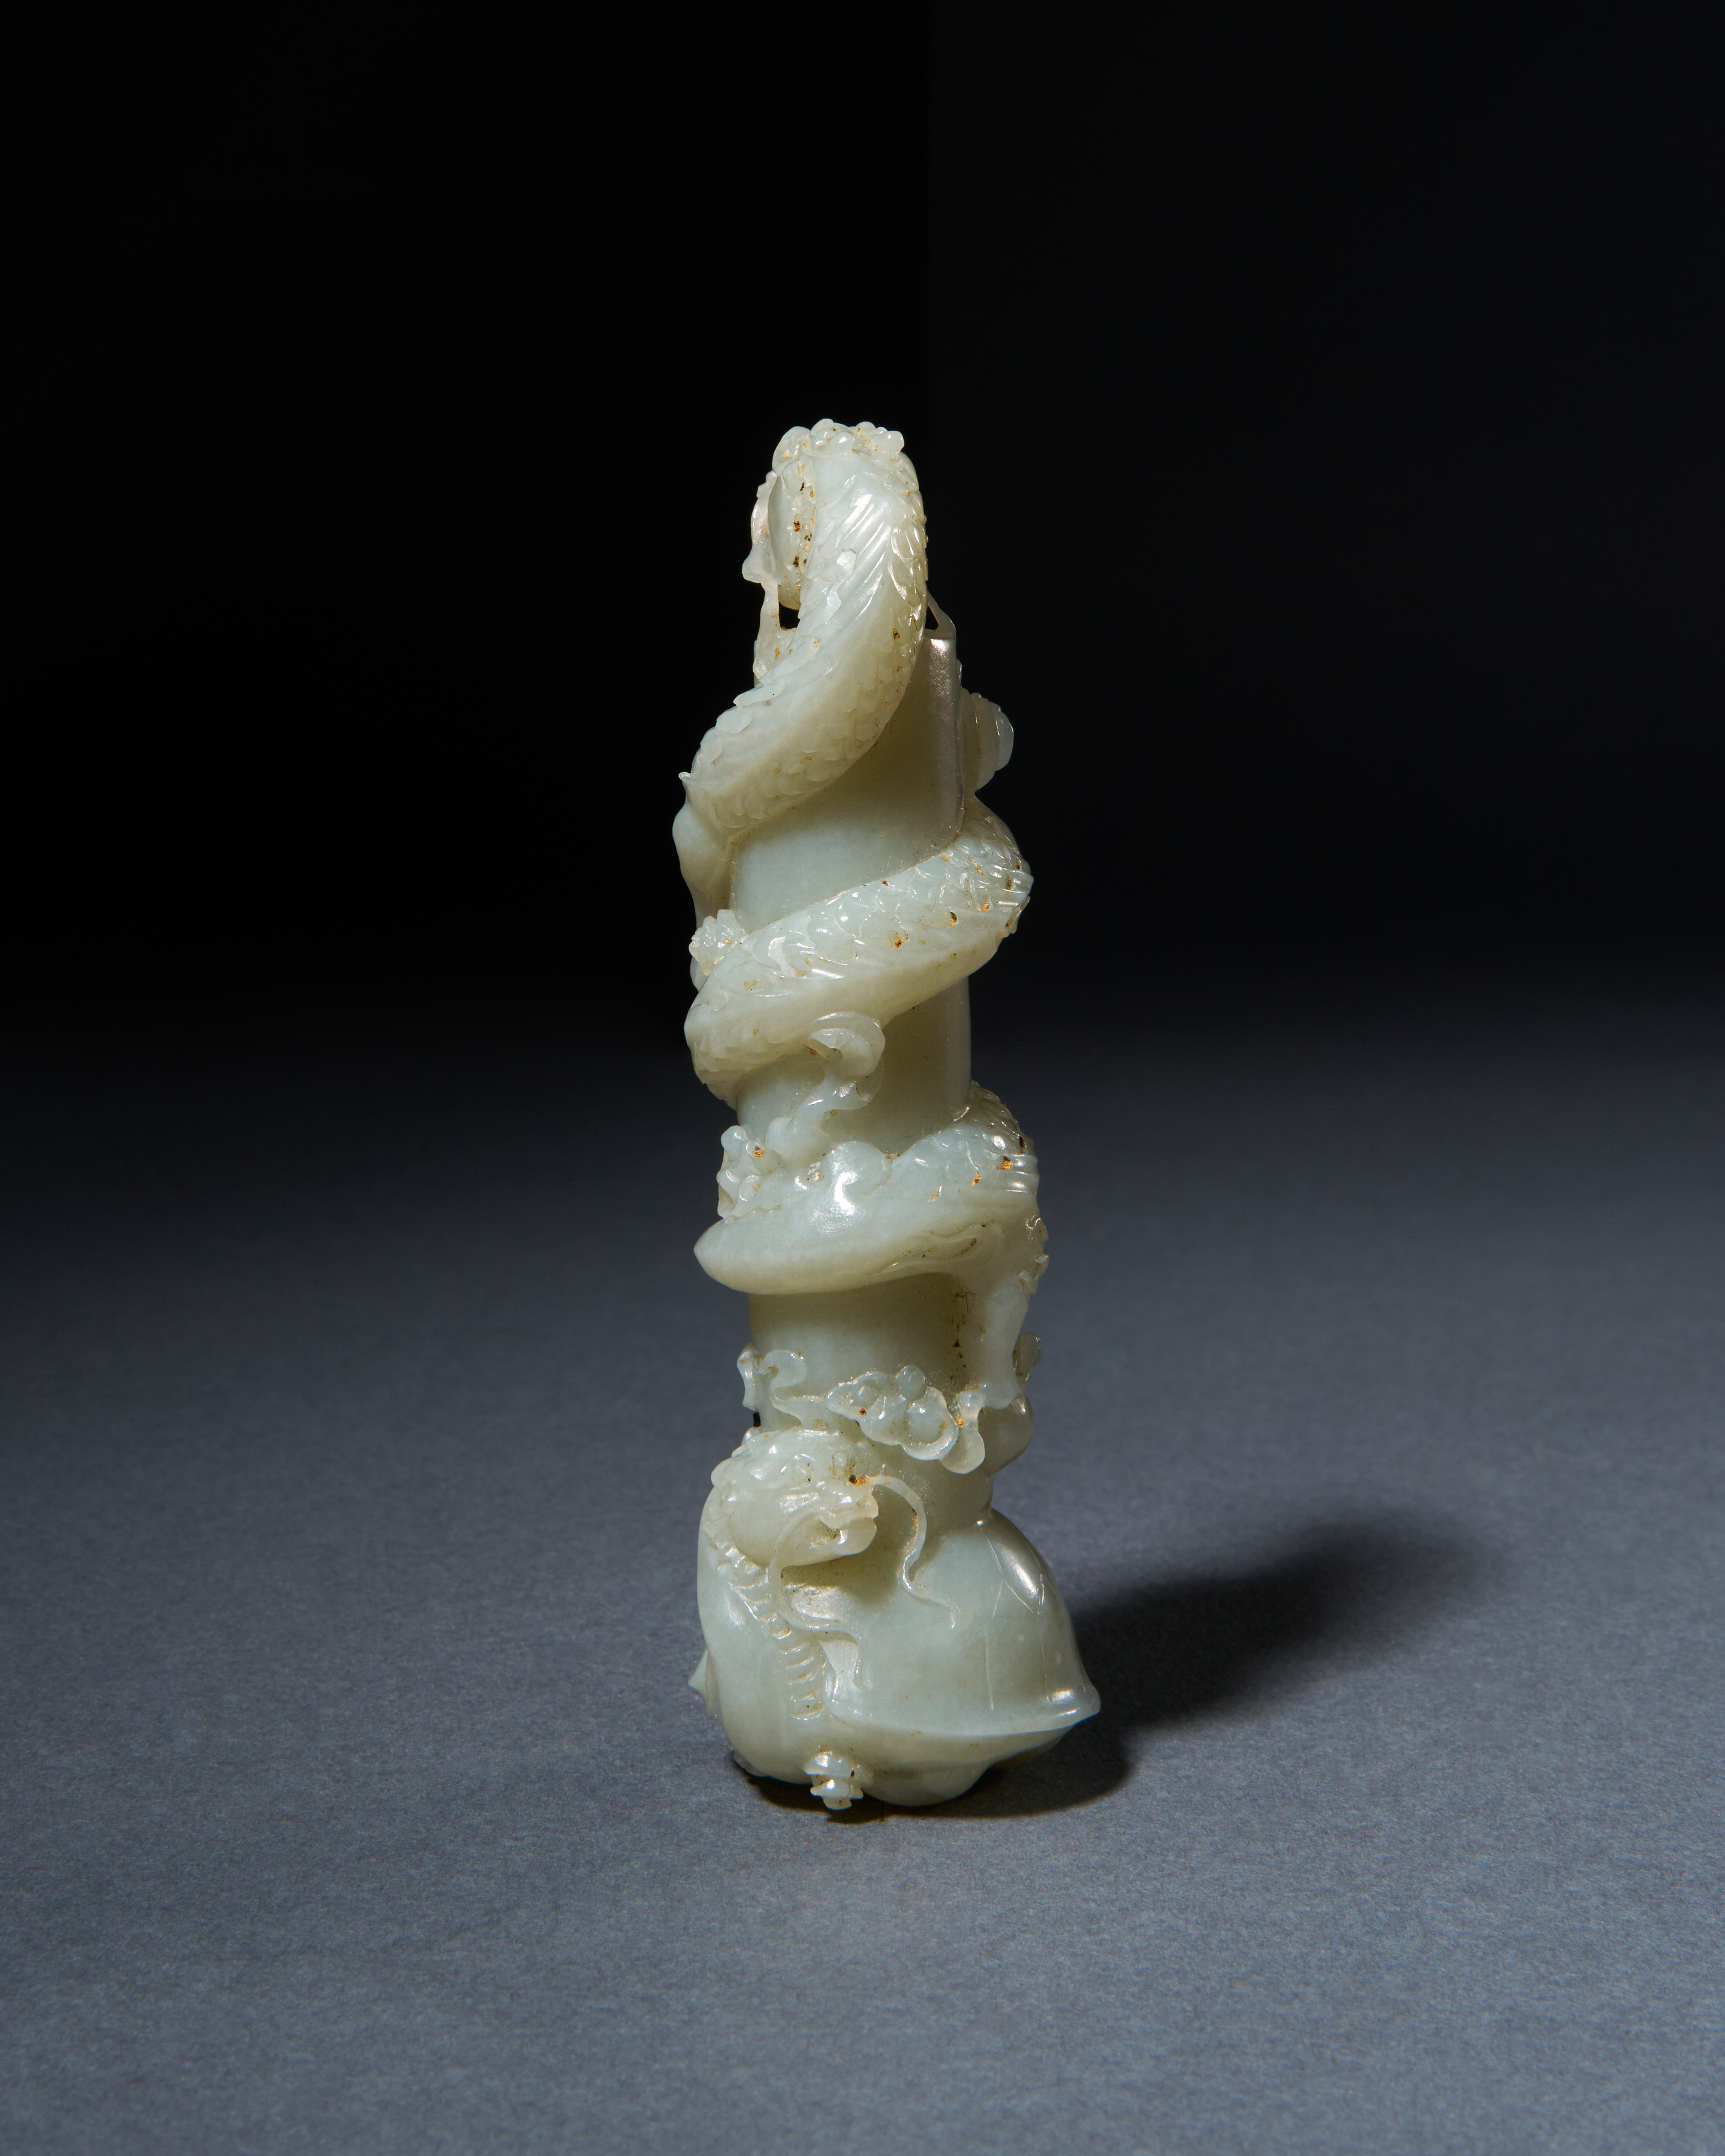 A LARGE CHINESE JADE "DRAGON" HANDLE, QING DYNASTY (1644-1911) - Image 2 of 4